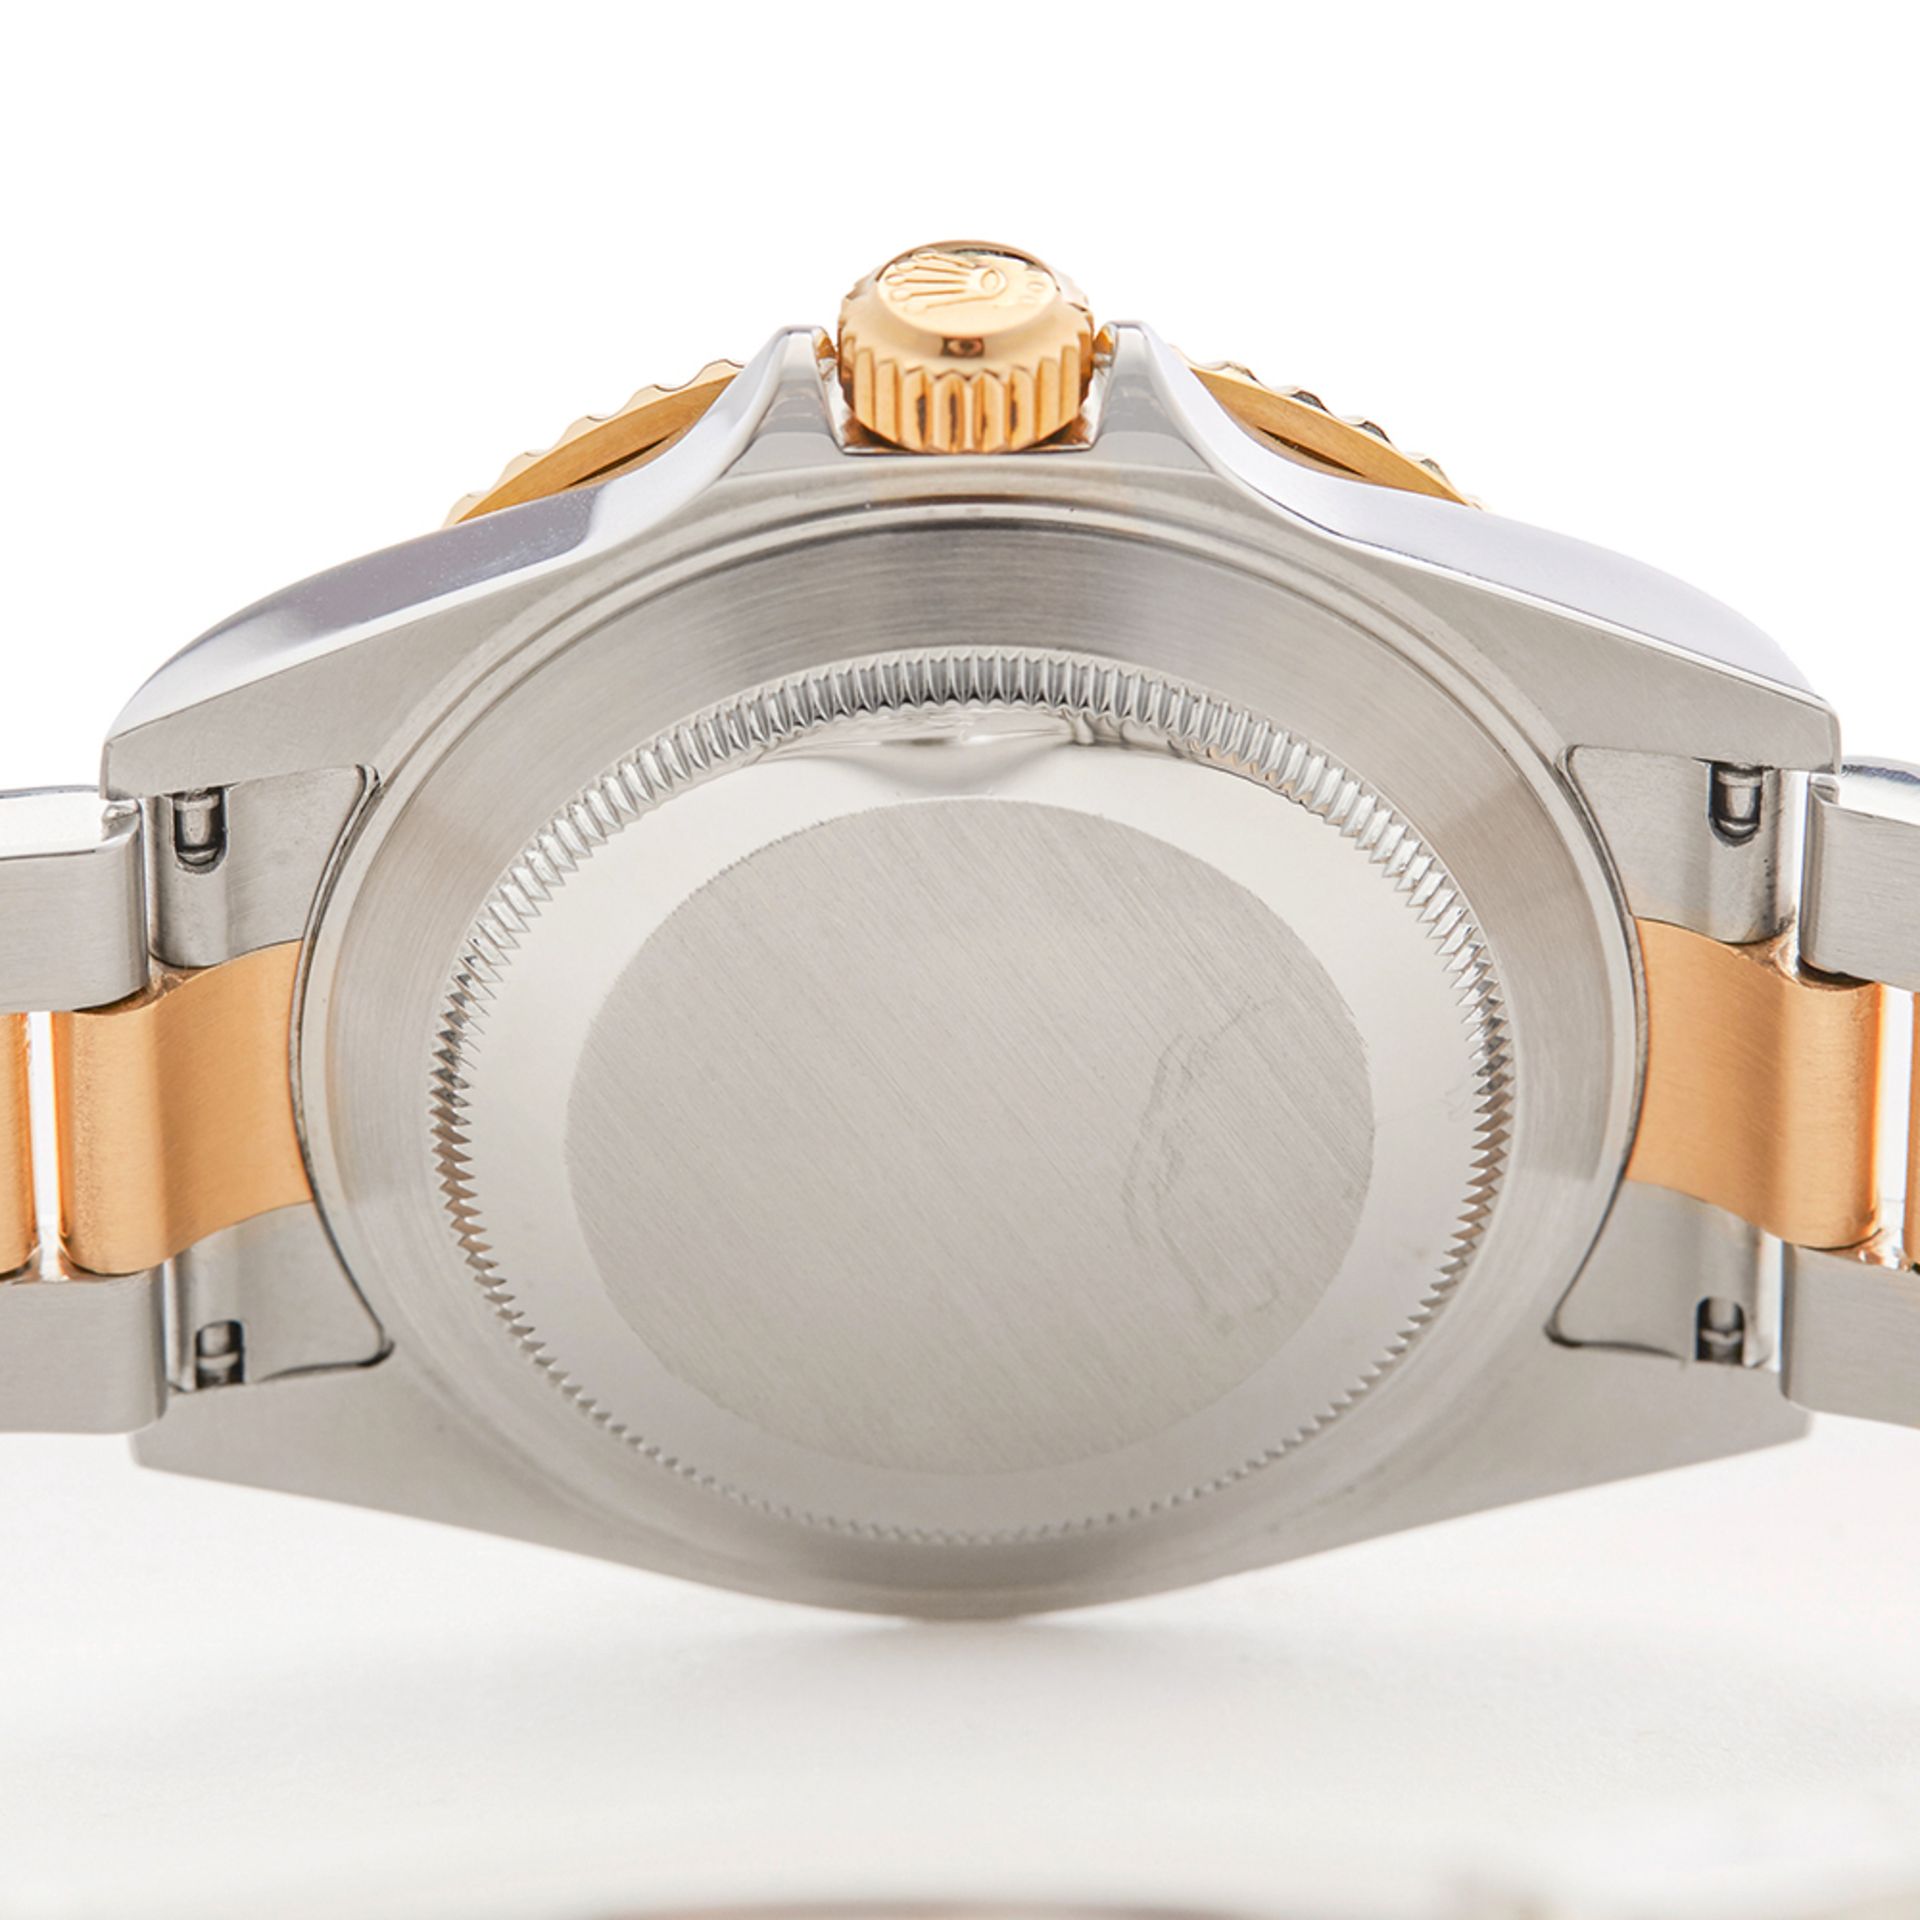 Submariner 40mm Stainless Steel & 18k Yellow Gold 16613 - Image 8 of 9